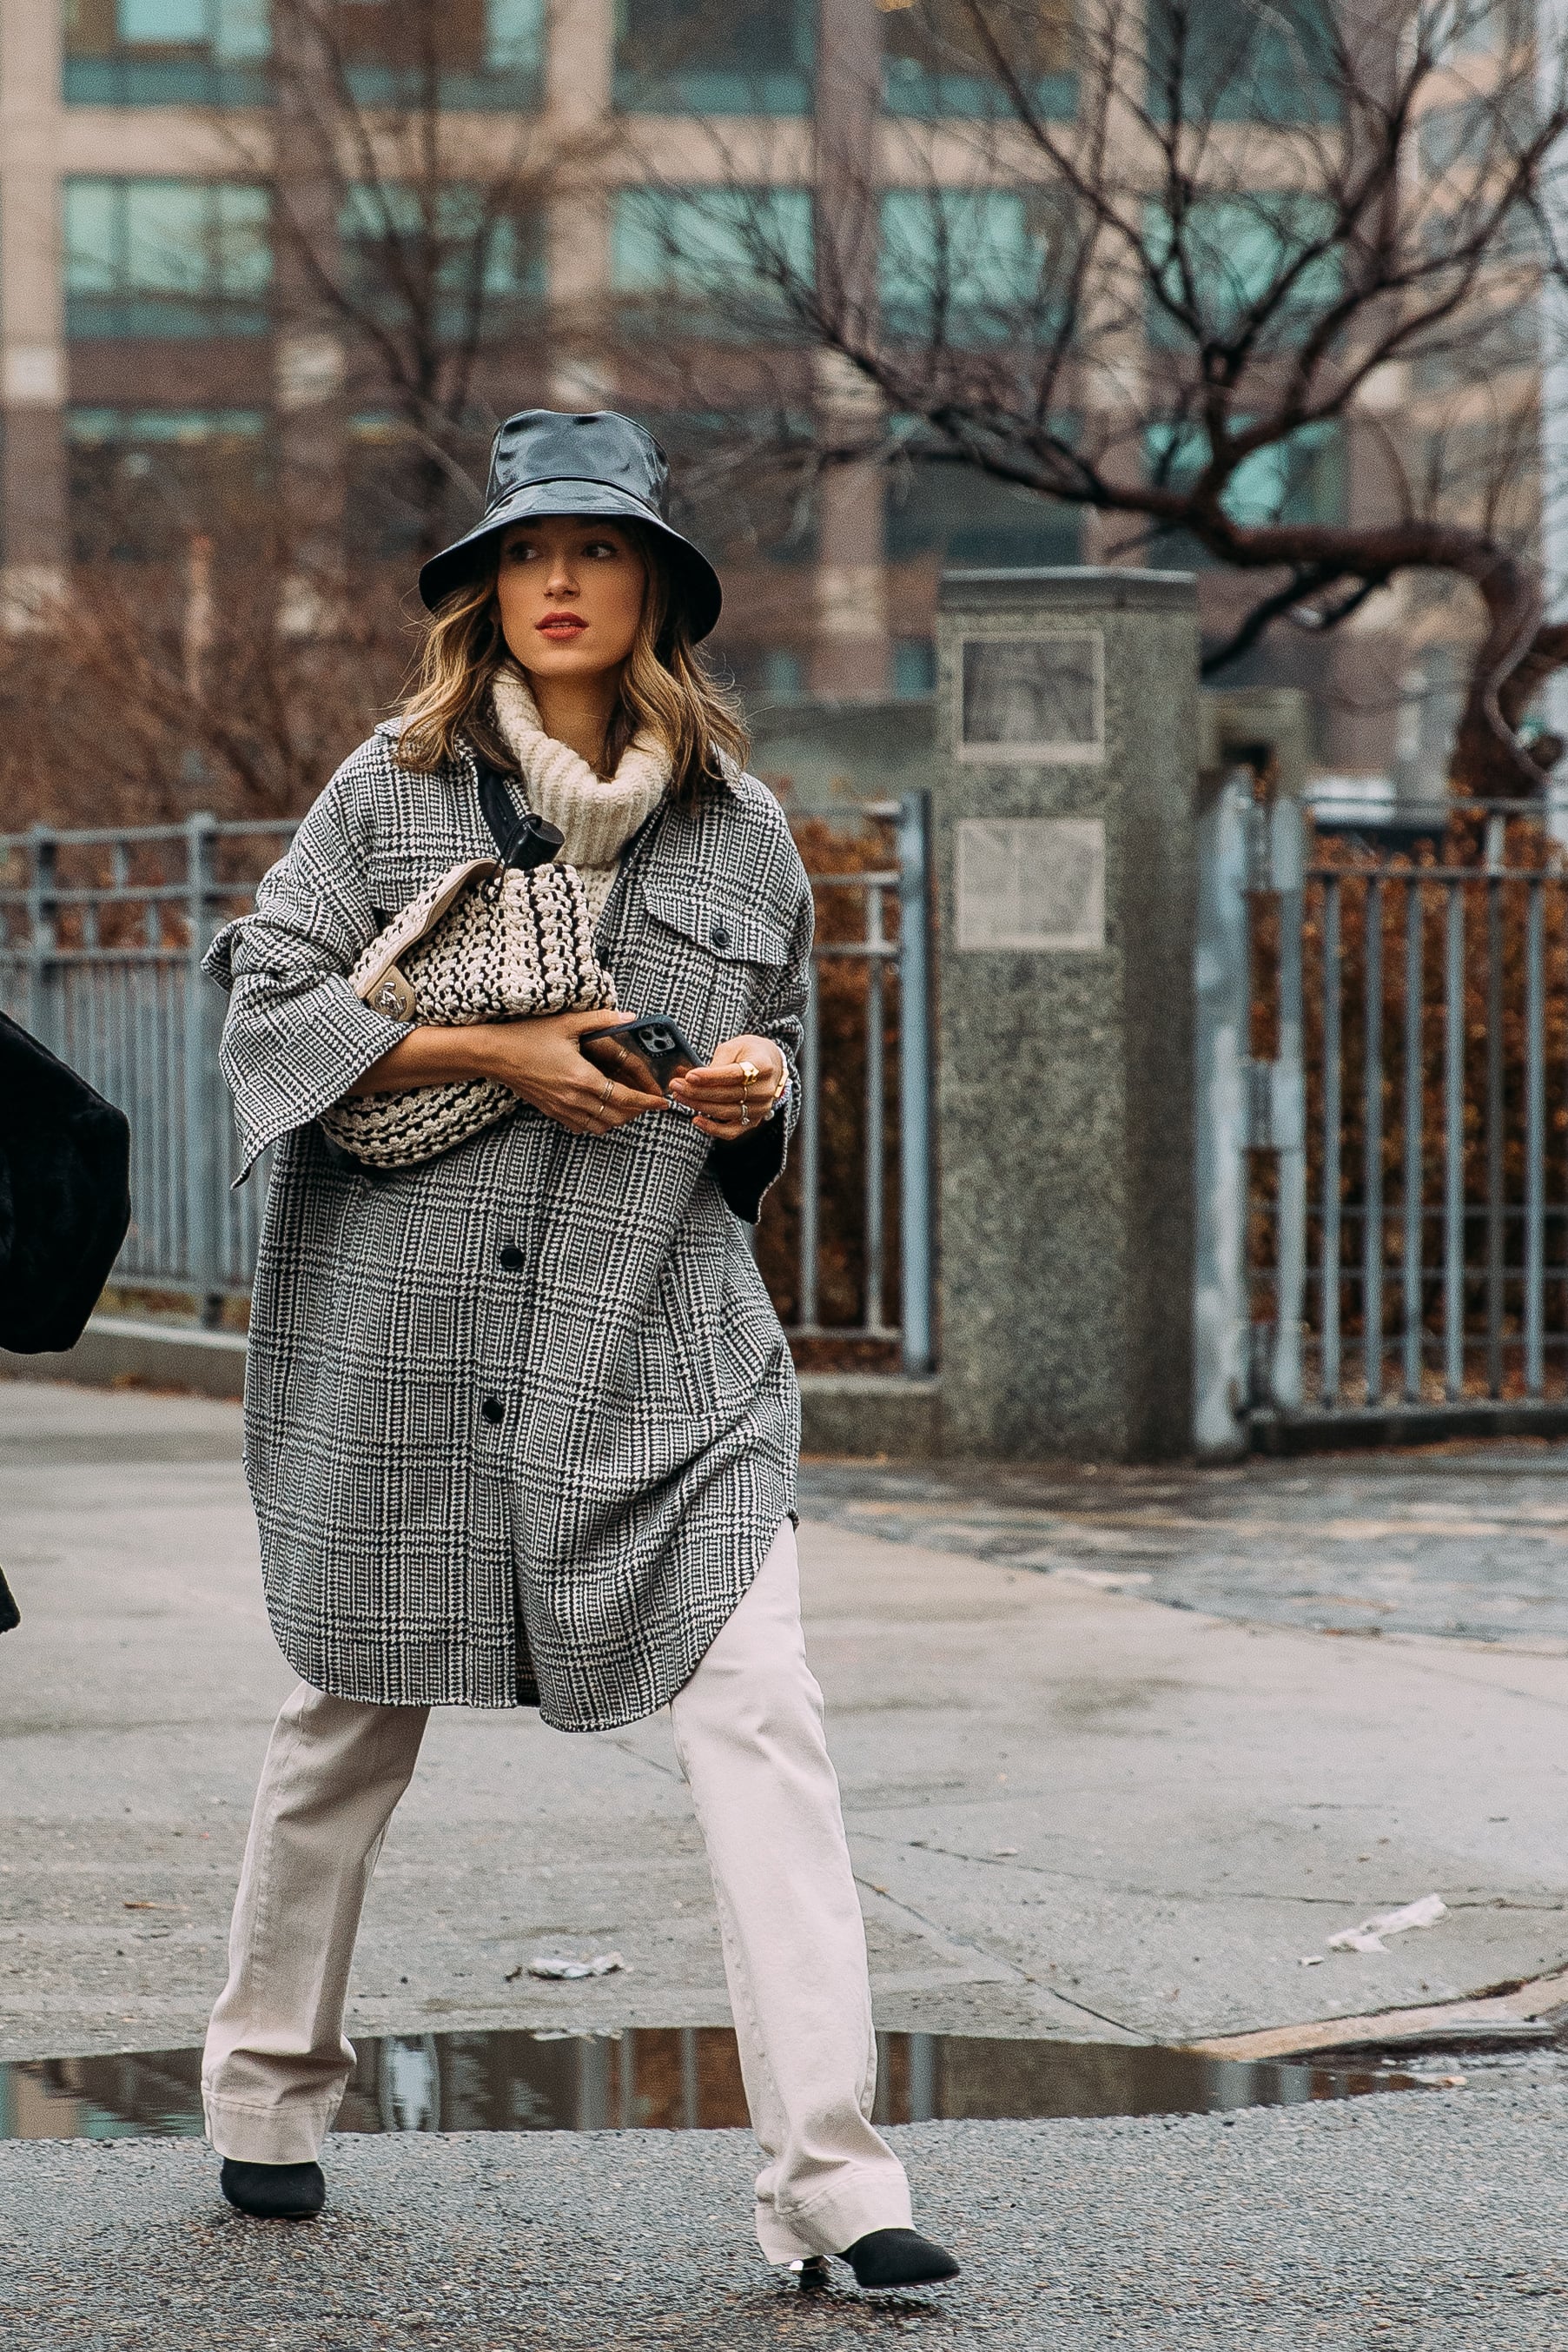 Oversized tote bags took Fall 2019 street style by storm